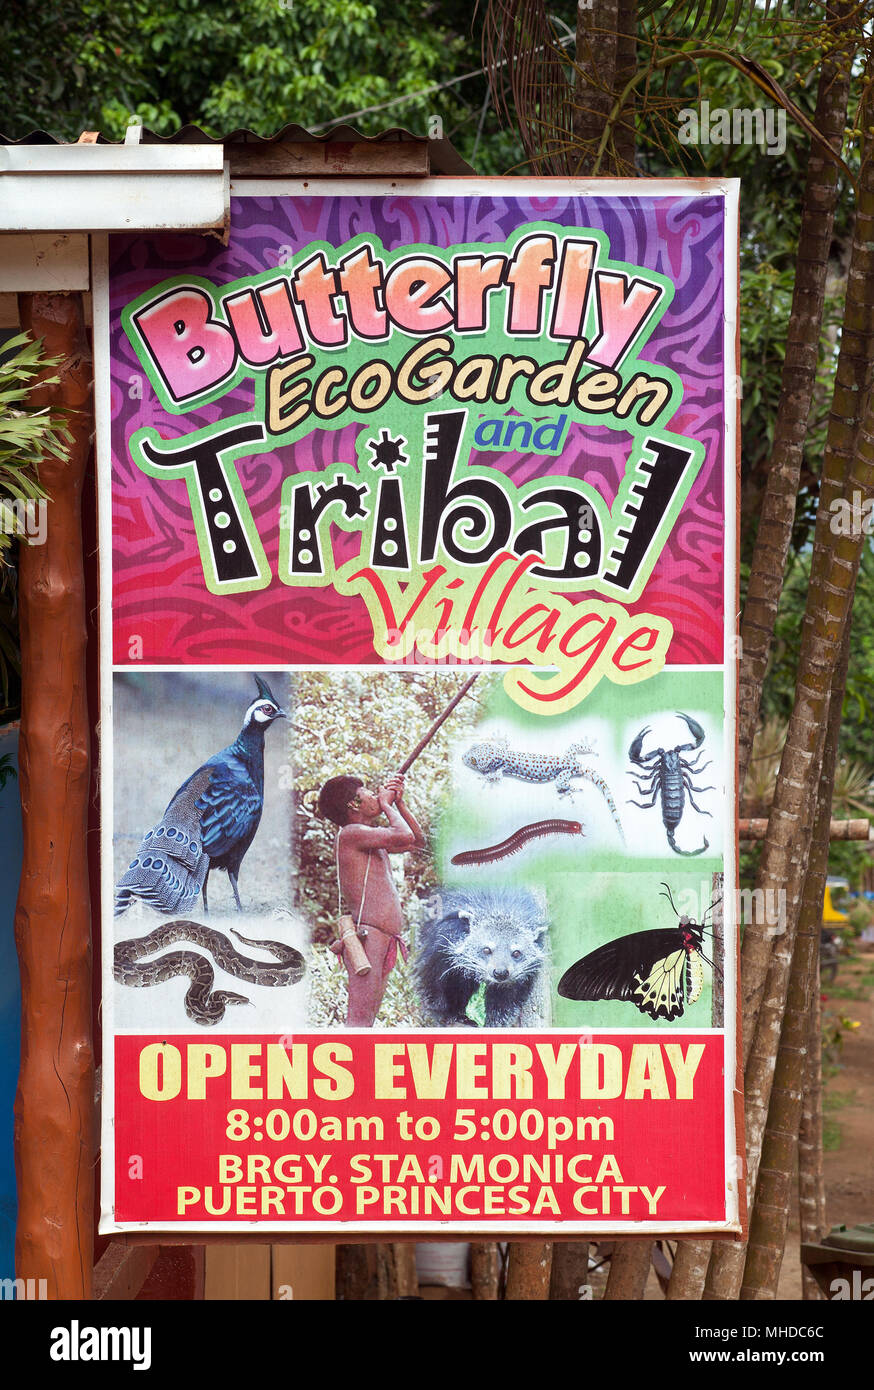 Poster ad for the Butterfly Eco Garden and Tribal Village in Puerto Princesa, Palawan, Philippines. Stock Photo